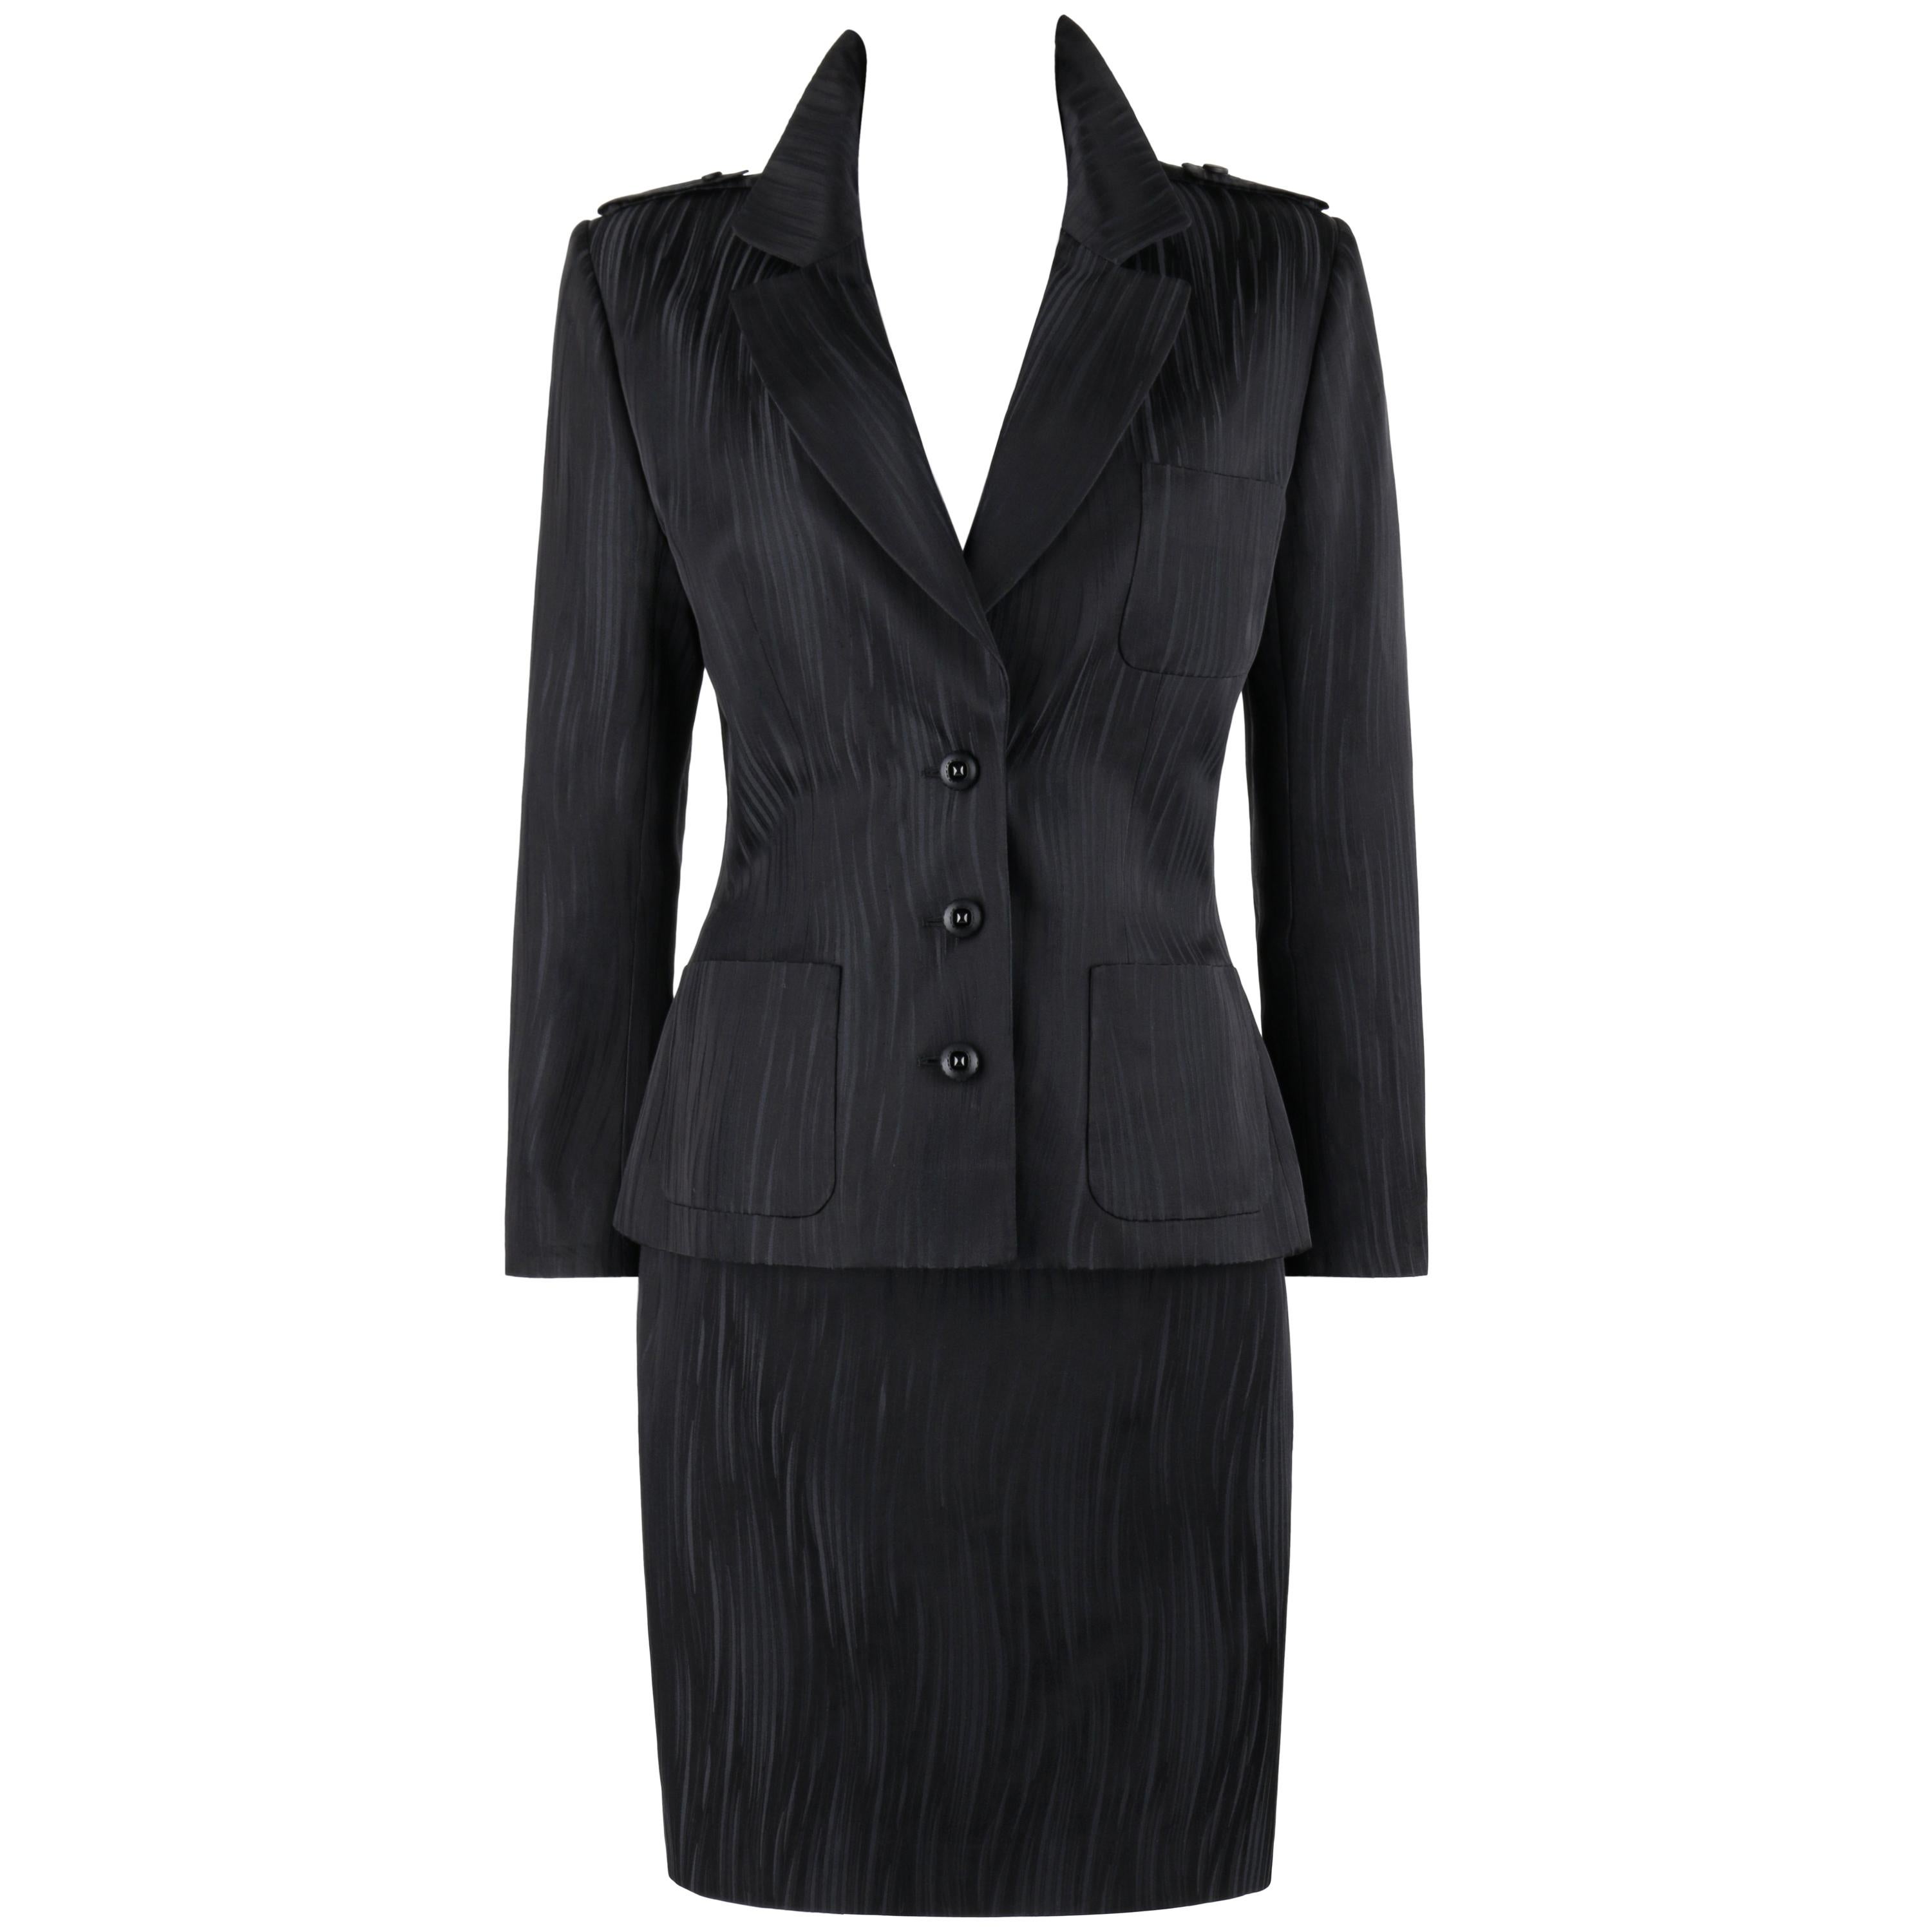 GIVENCHY Couture A/W 1999 ALEXANDER McQUEEN Black Gray Stripe Blazer Skirt Suit